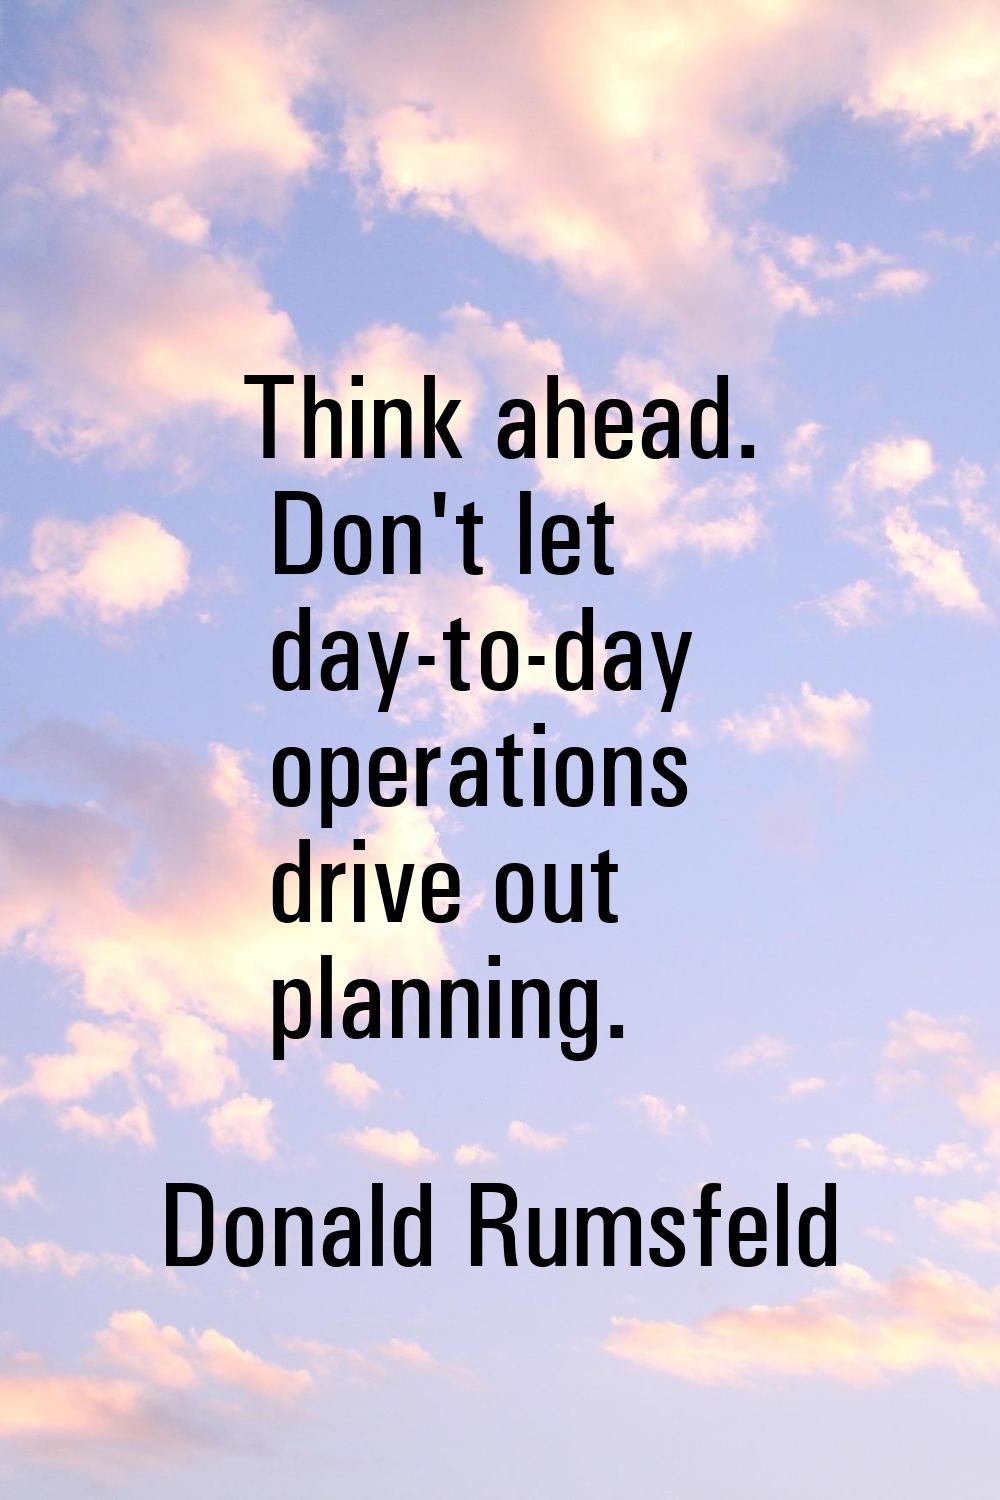 Think ahead. Don't let day-to-day operations drive out planning.